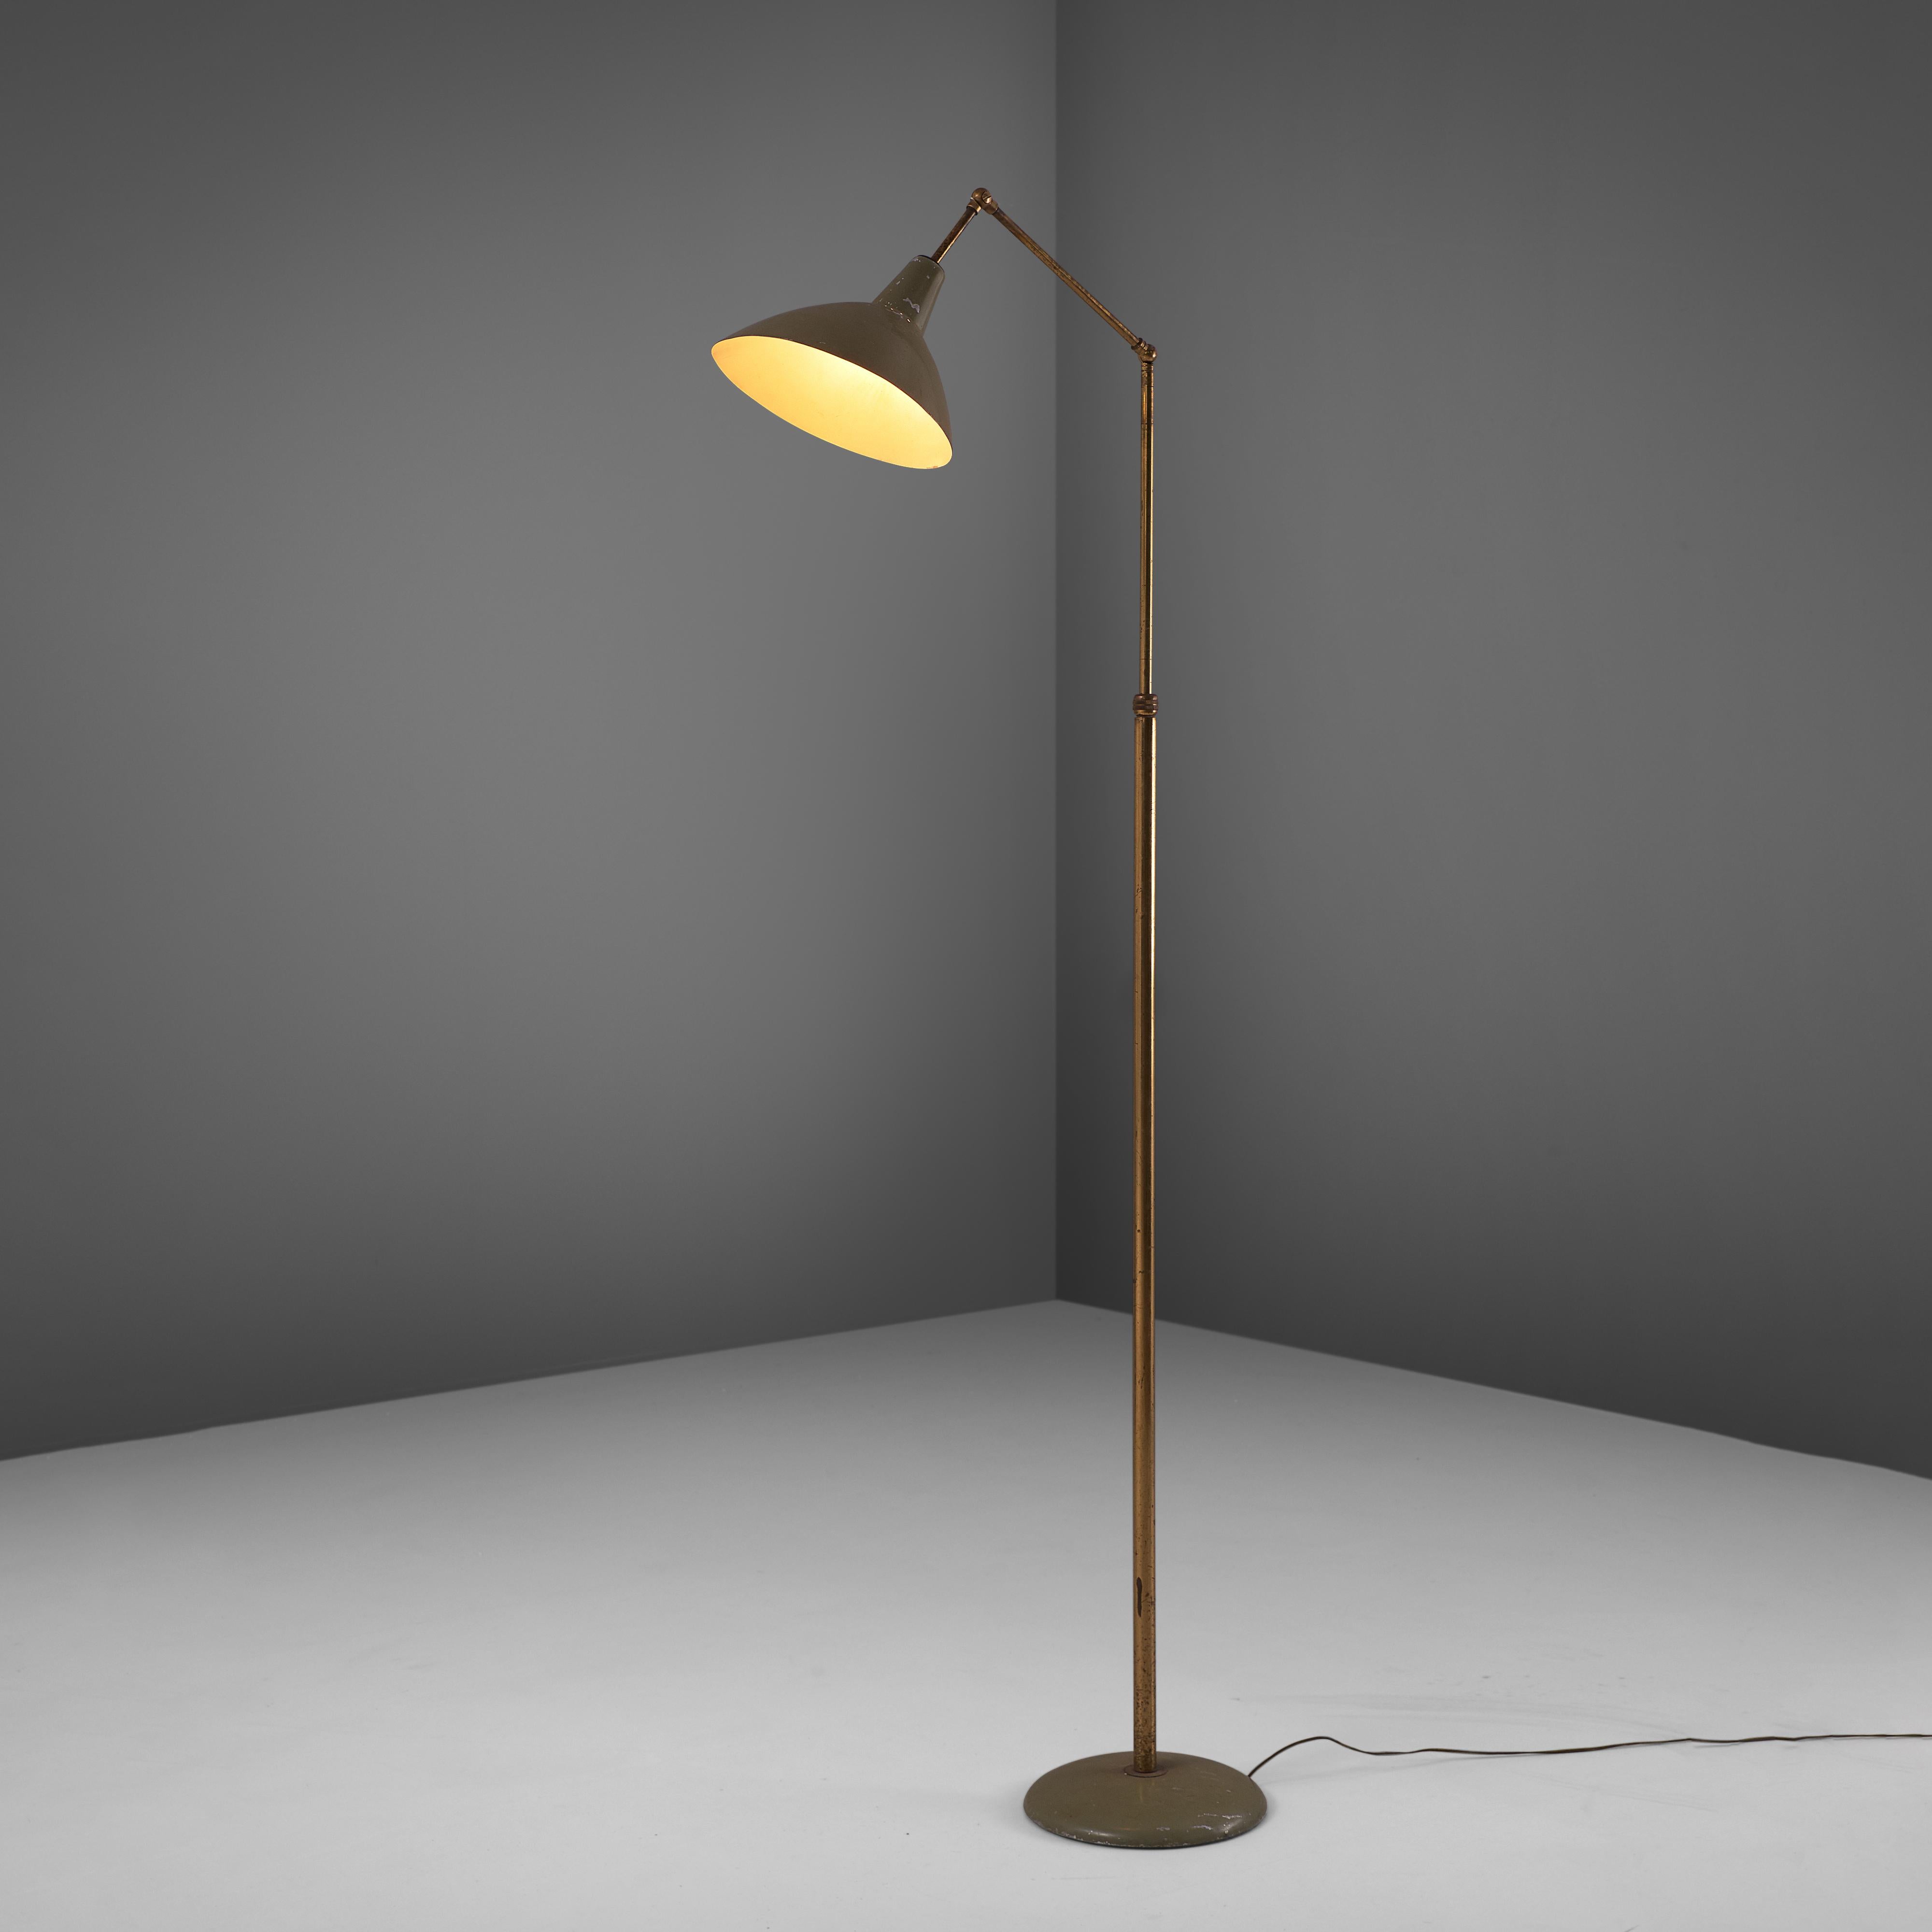 Floor lamp, metal and brass, Italy, 1950s.

This Italian floor lamp combines great aestethics with functional aspects. A round green lacquered metal base. The slim stern in brass is nicely patinated and has two pivot points to position the shade in